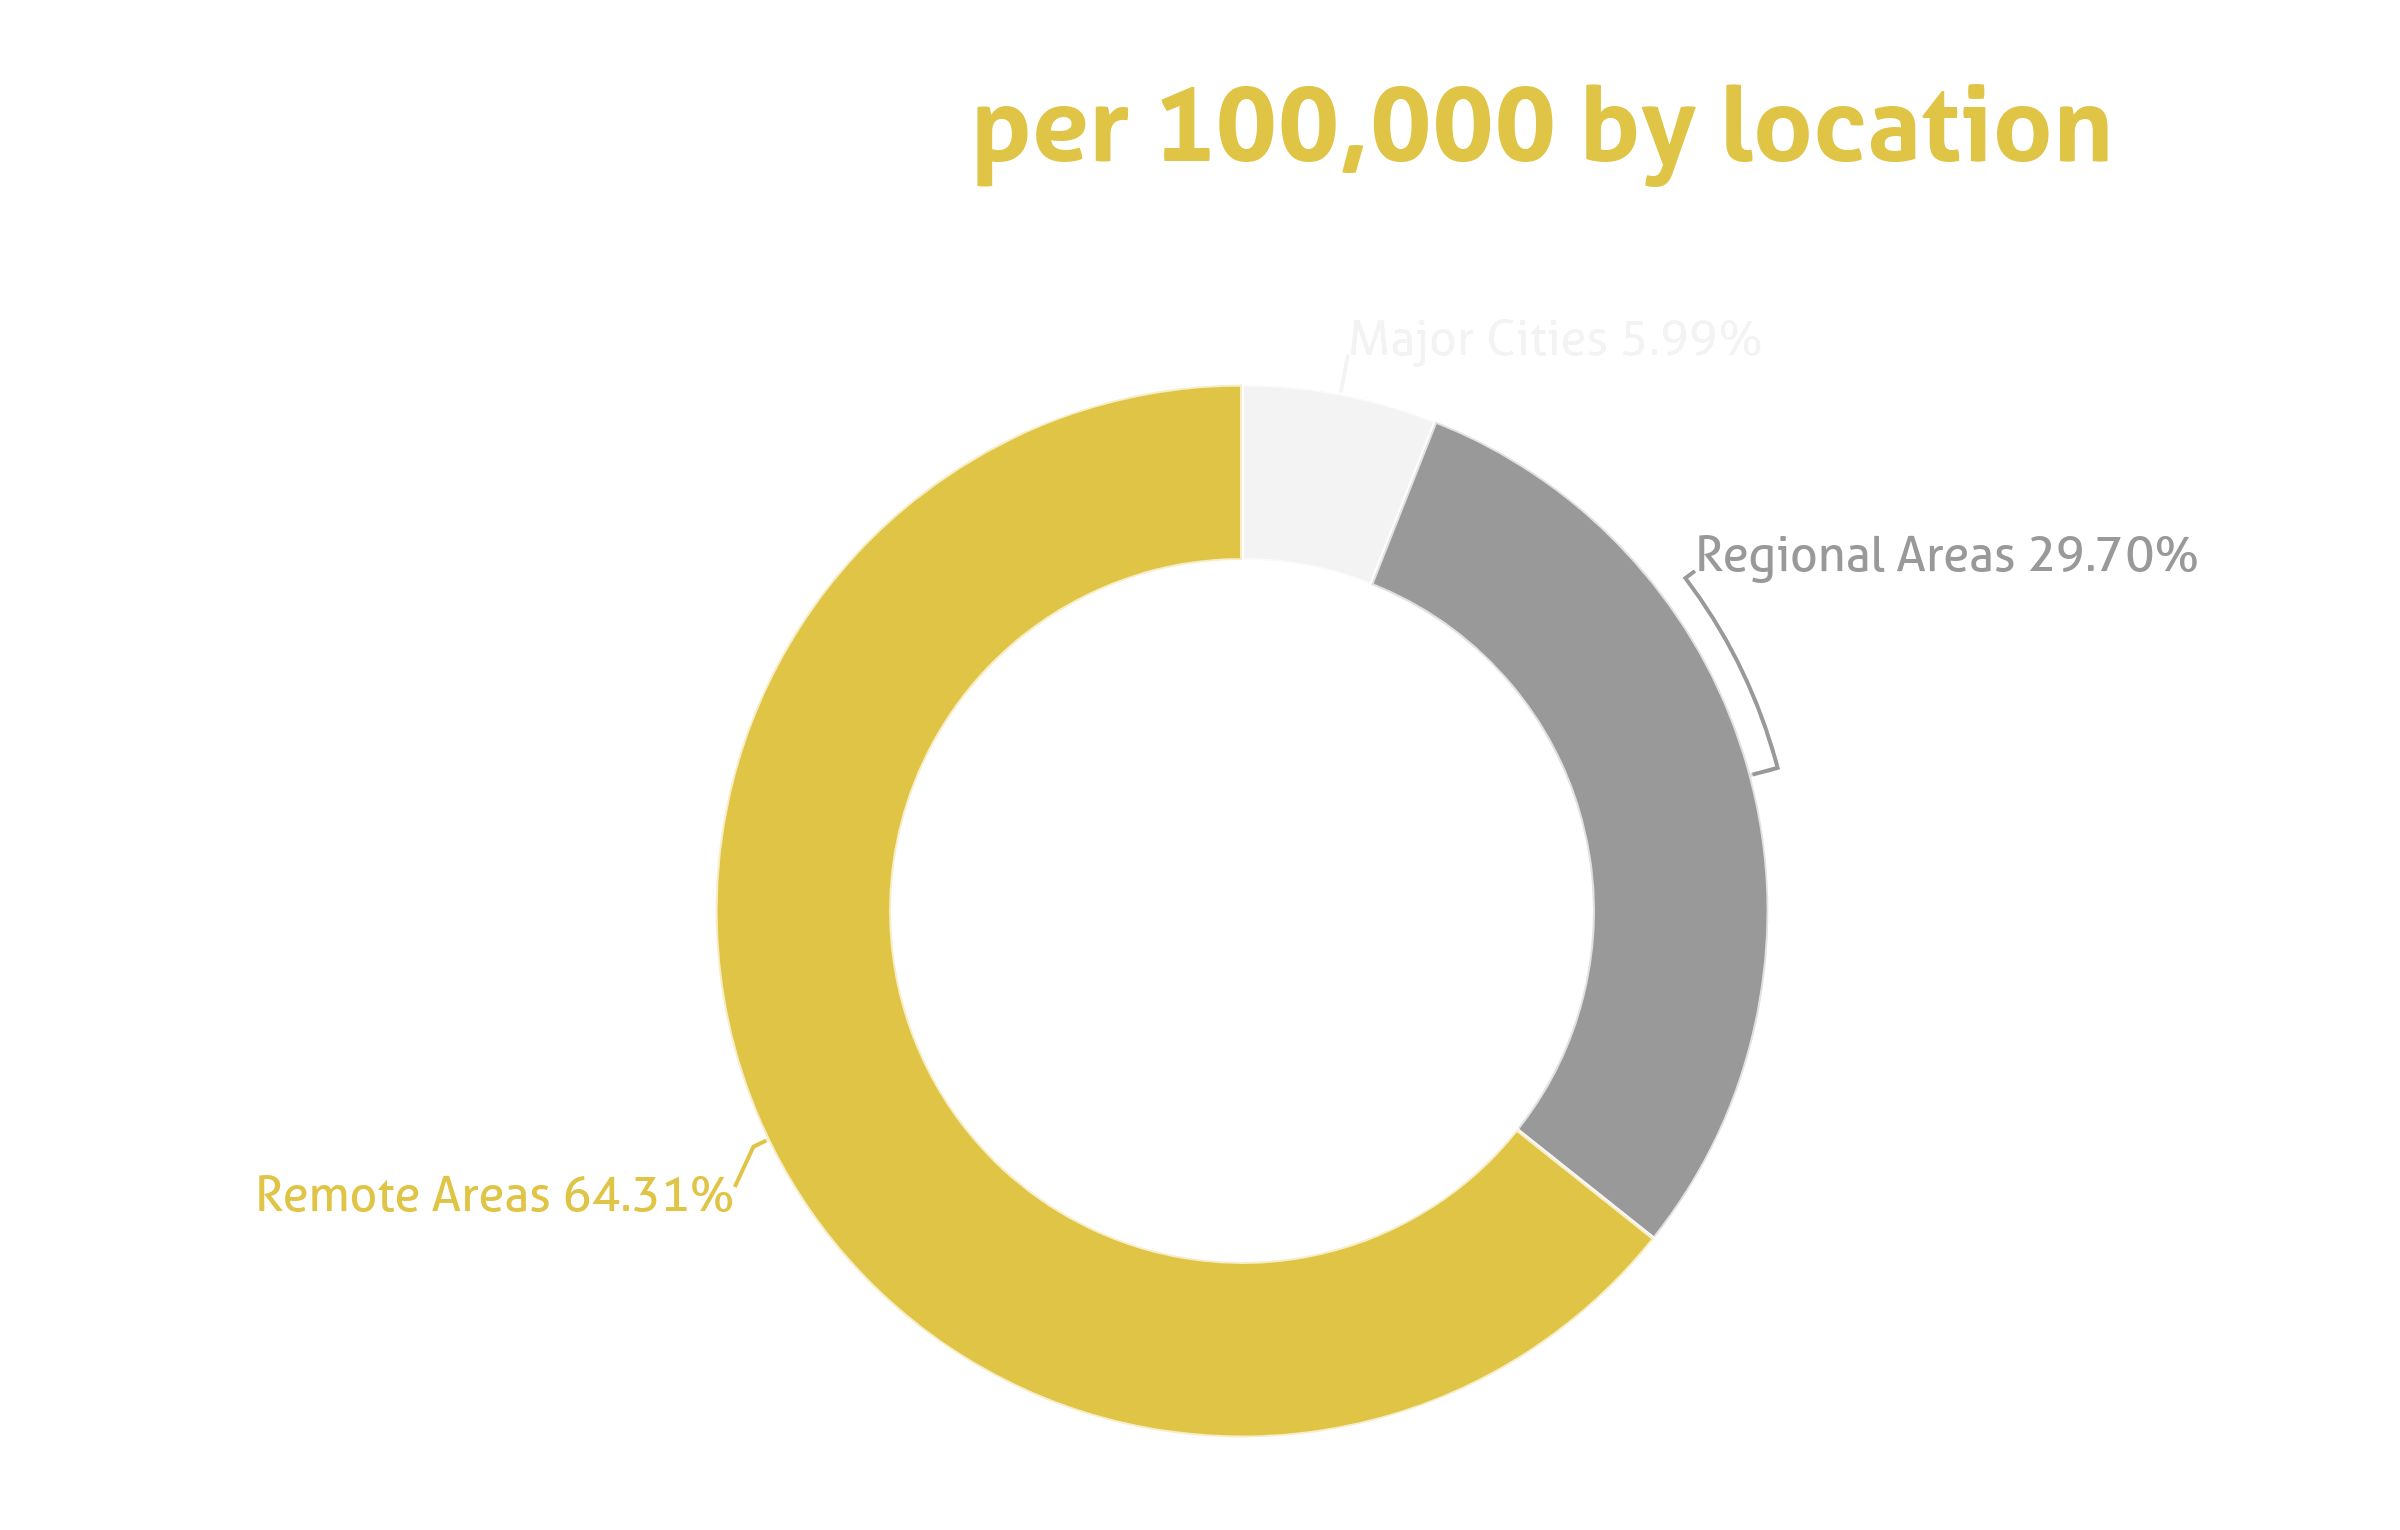 a pie chart showing Australian road fatality rates by regional area